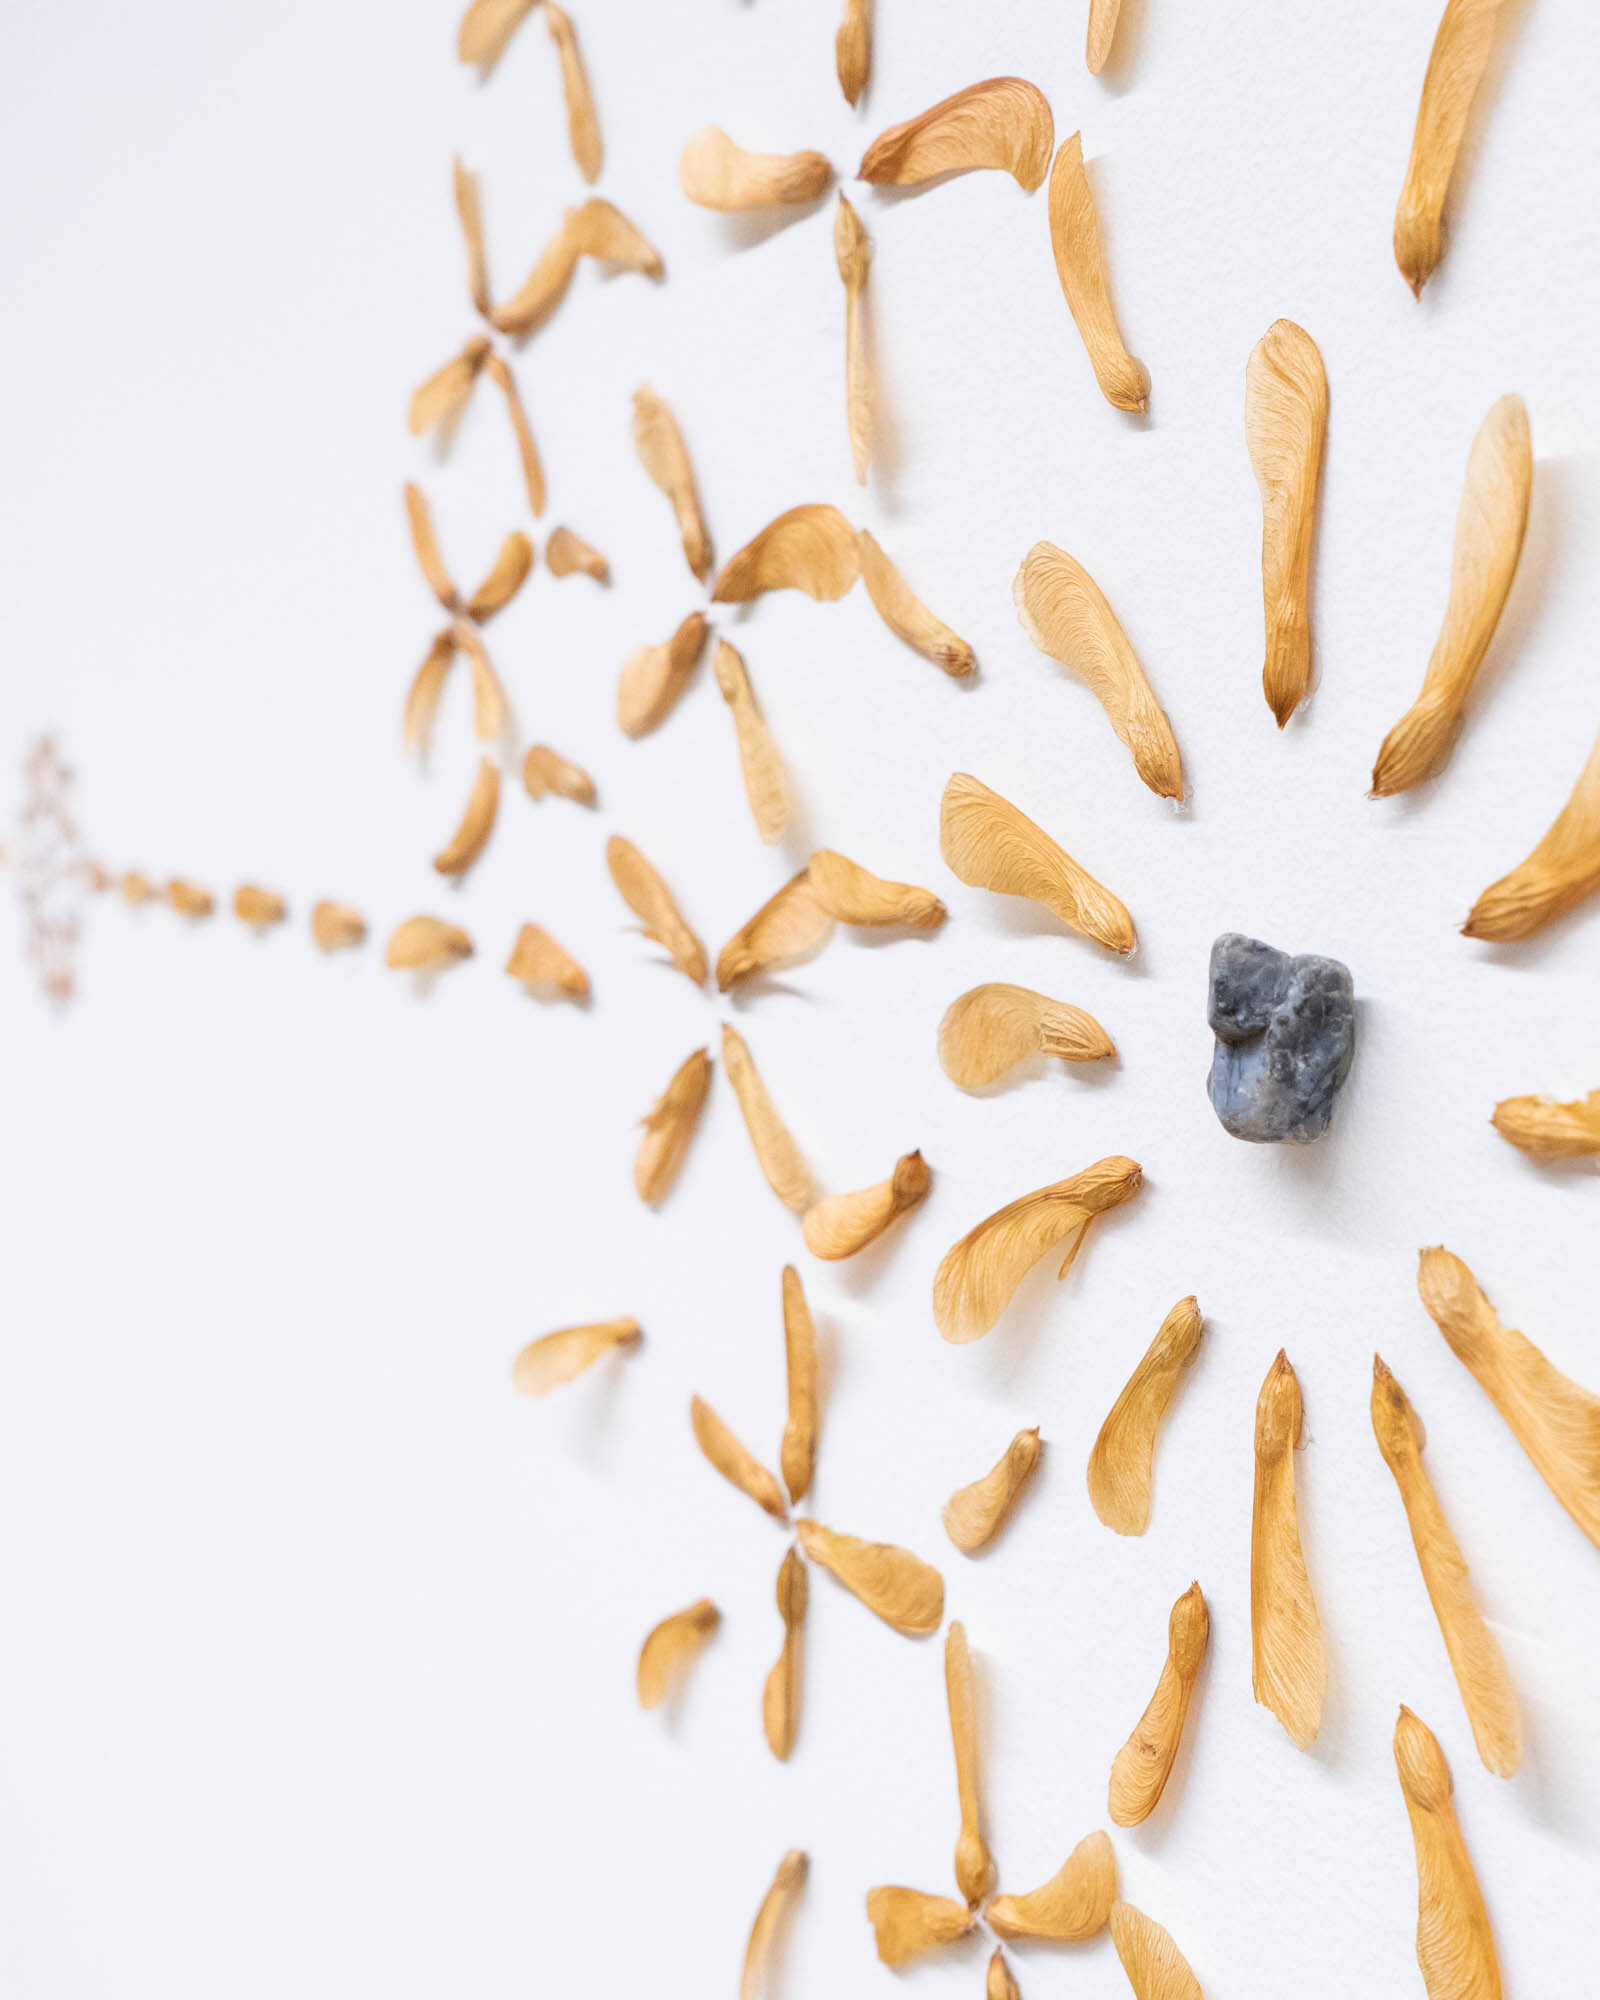 Maple Seeds Are Mounted On A White Wall In A Circular Design